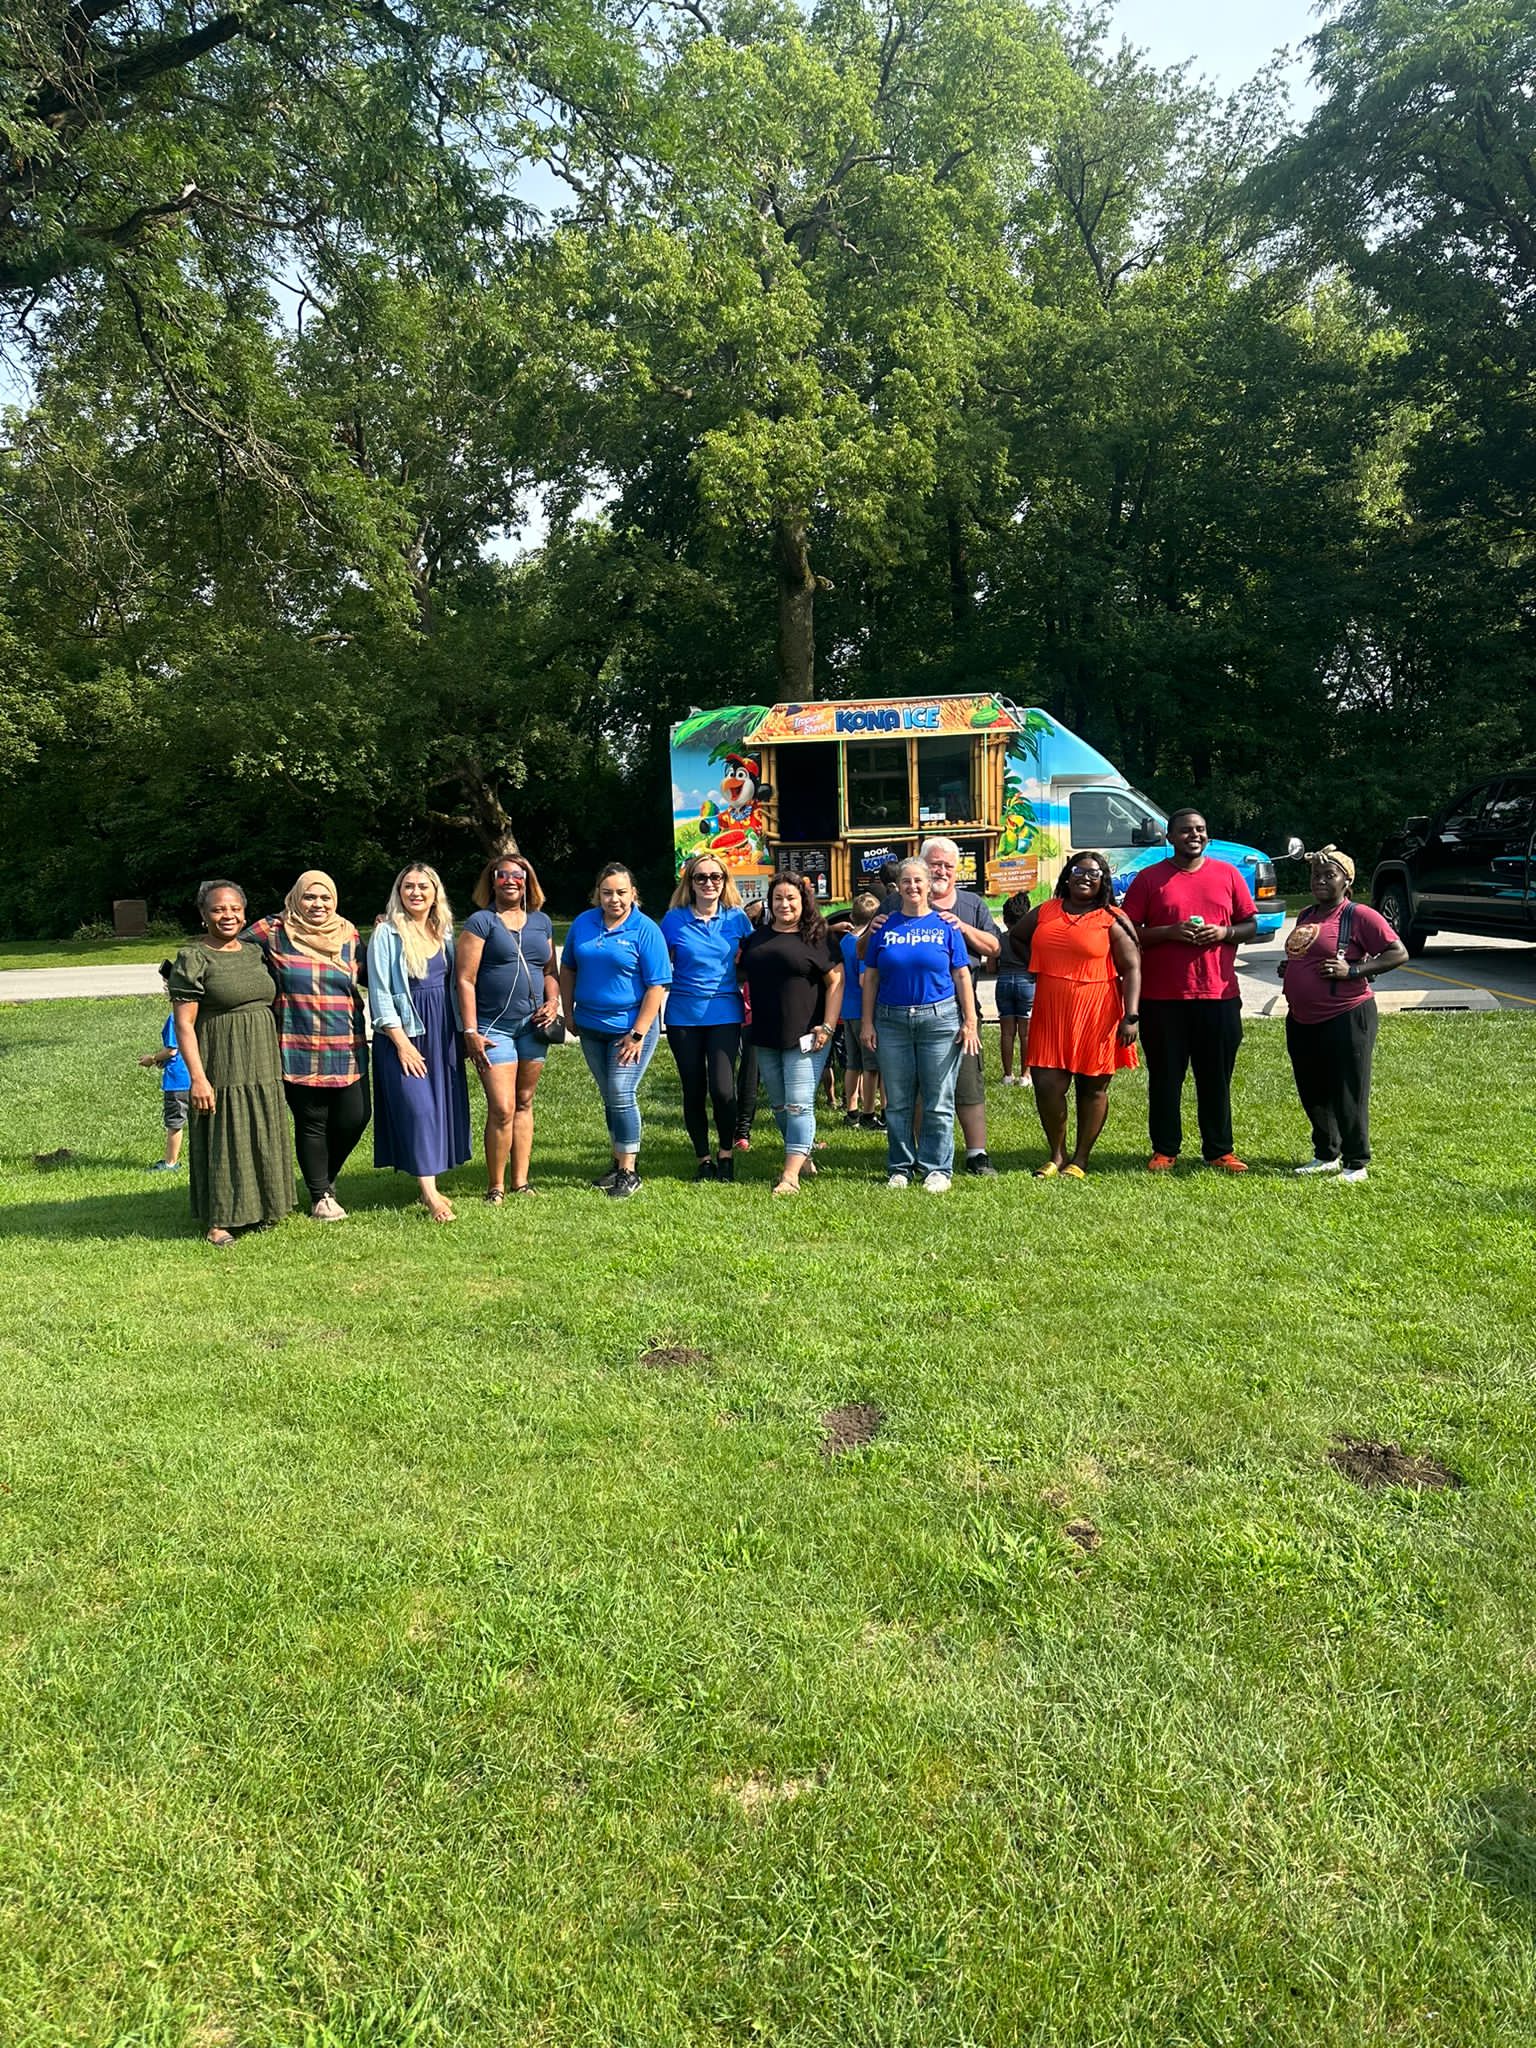 Celebrating a great team and having fun at our Senior Helpers of Bolingbrook Staff Appreciation Day - a perfect occasion to celebrate all that we have delivered caring for our clients. Thank you so much for all that you do - you truly make a difference to people’s lives.  #staffappreciation #seniorcare #caregiver #bettertogether #lovewhatyoudo